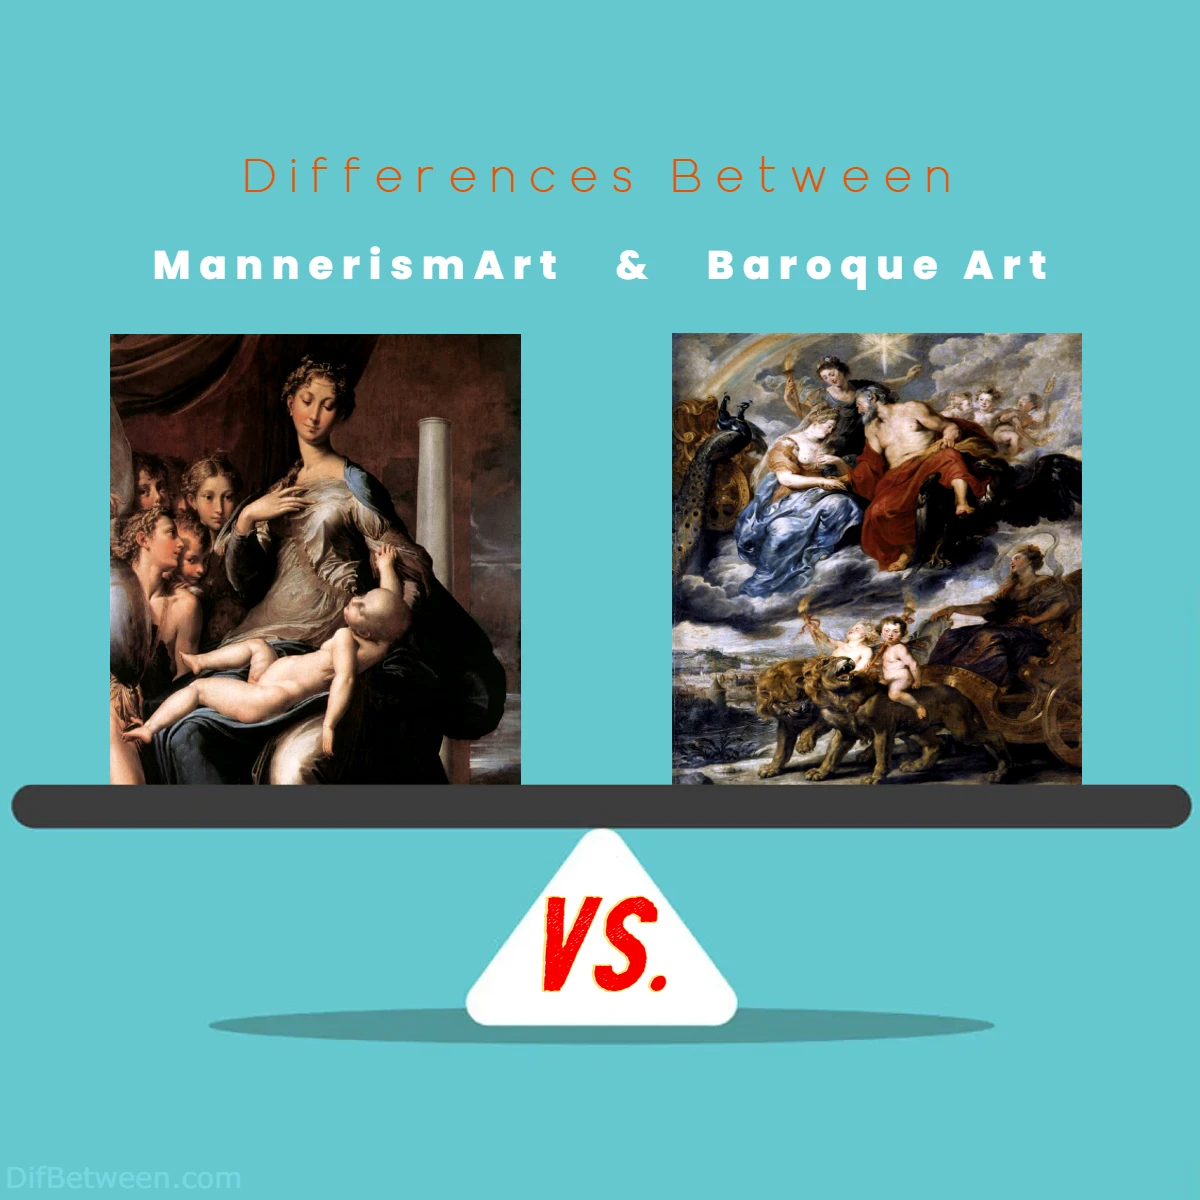 Differences Between Mannerism vs Baroque Art